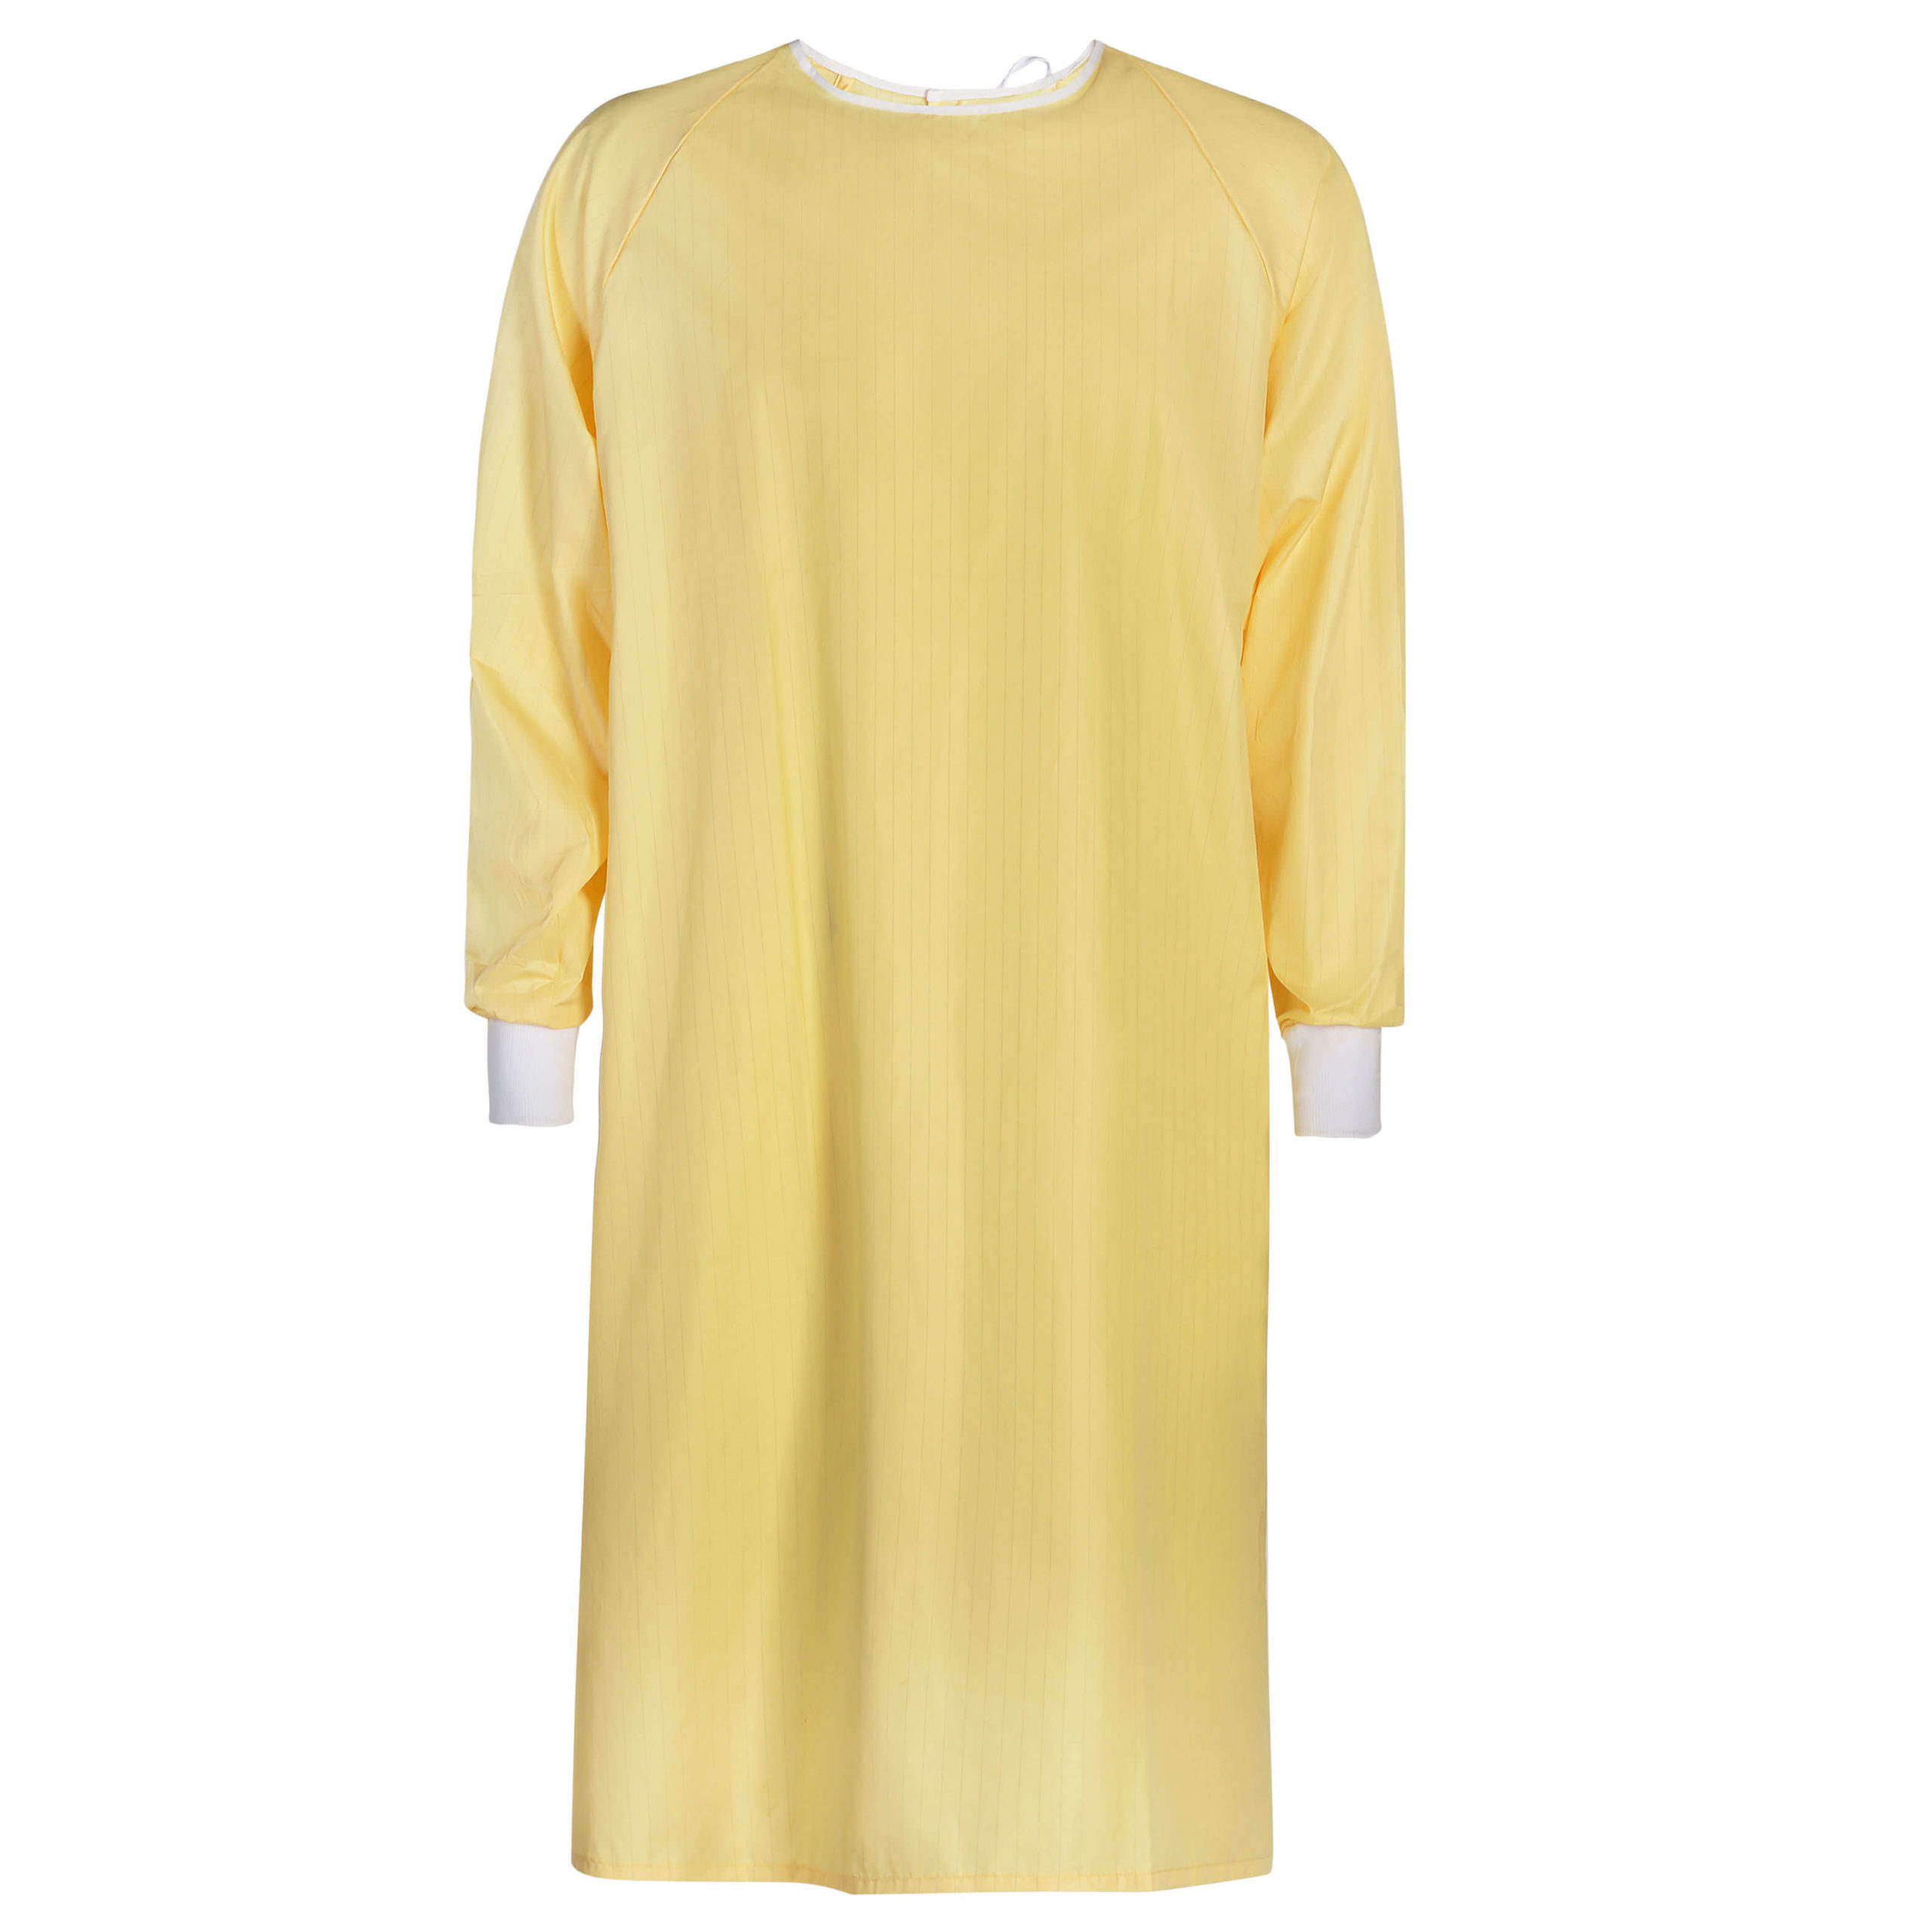 Reliafit™ Level II Isolation Gown